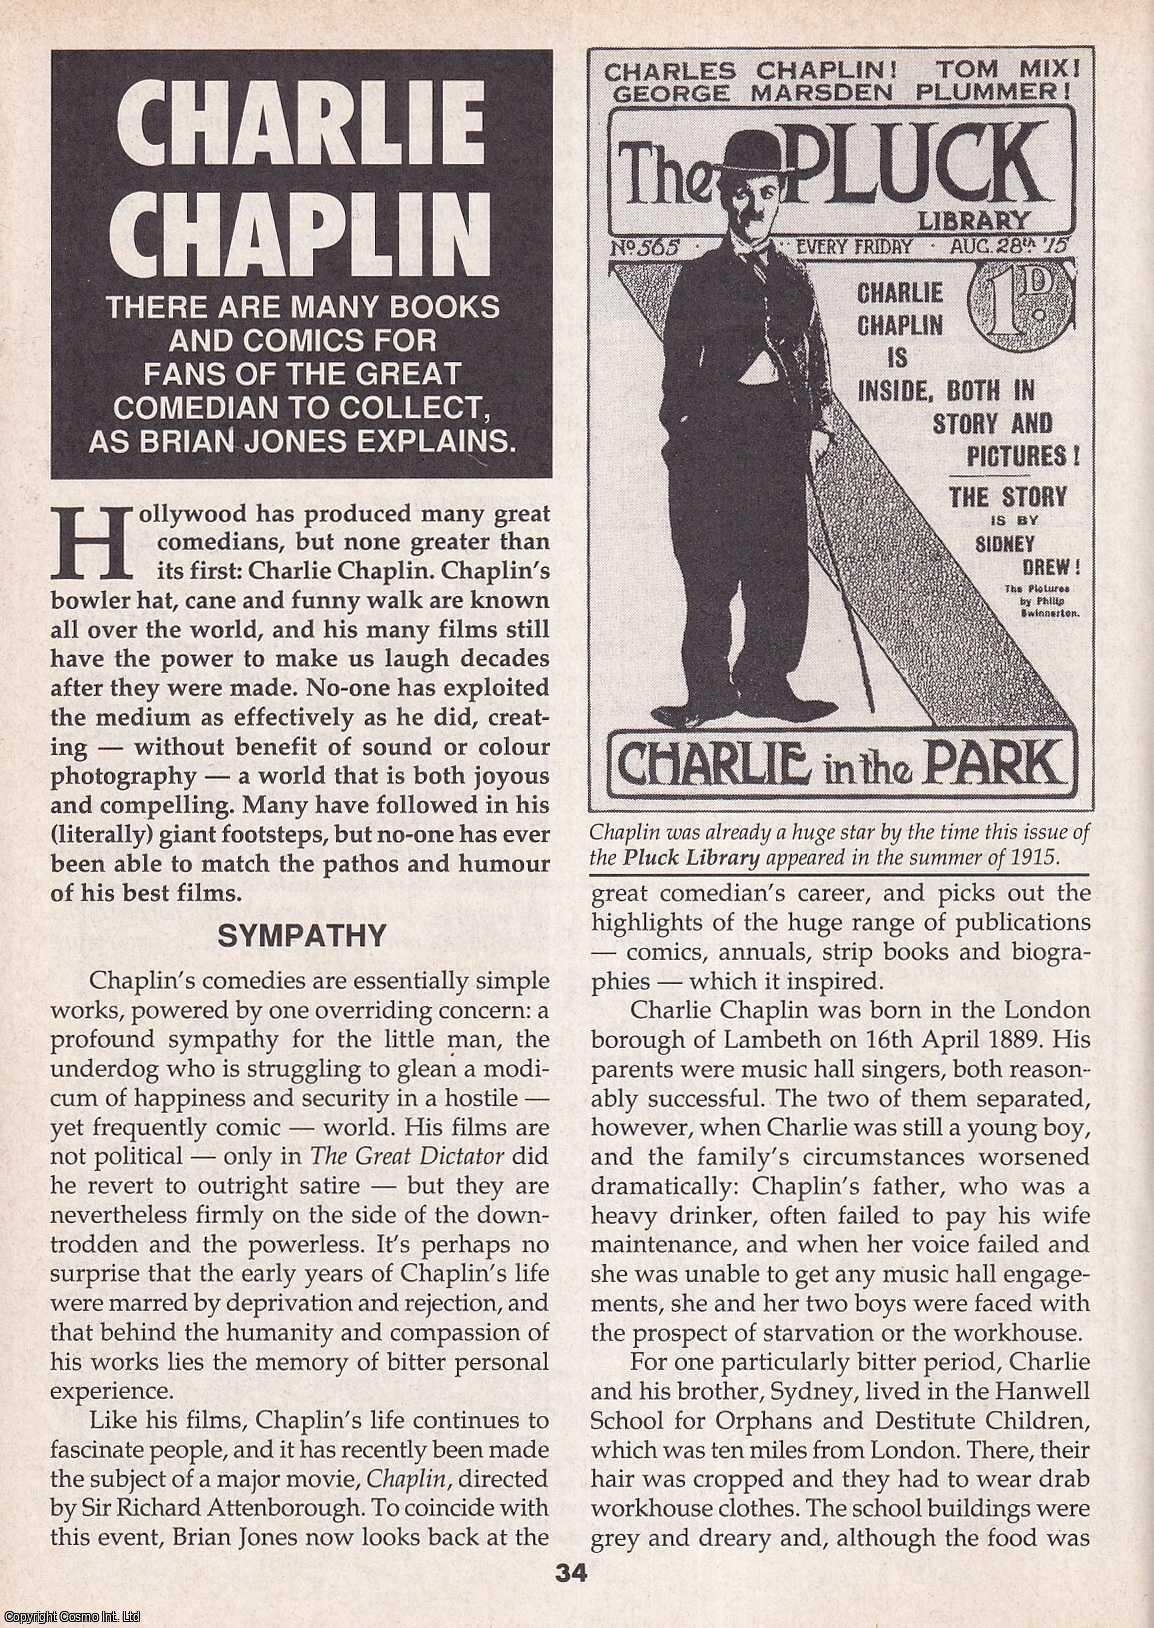 Brian Jones - Charlie Chaplin. There's Many Books and Comics for Fans of The Great Comedian to Collect. This is an original article separated from an issue of The Book & Magazine Collector publication.